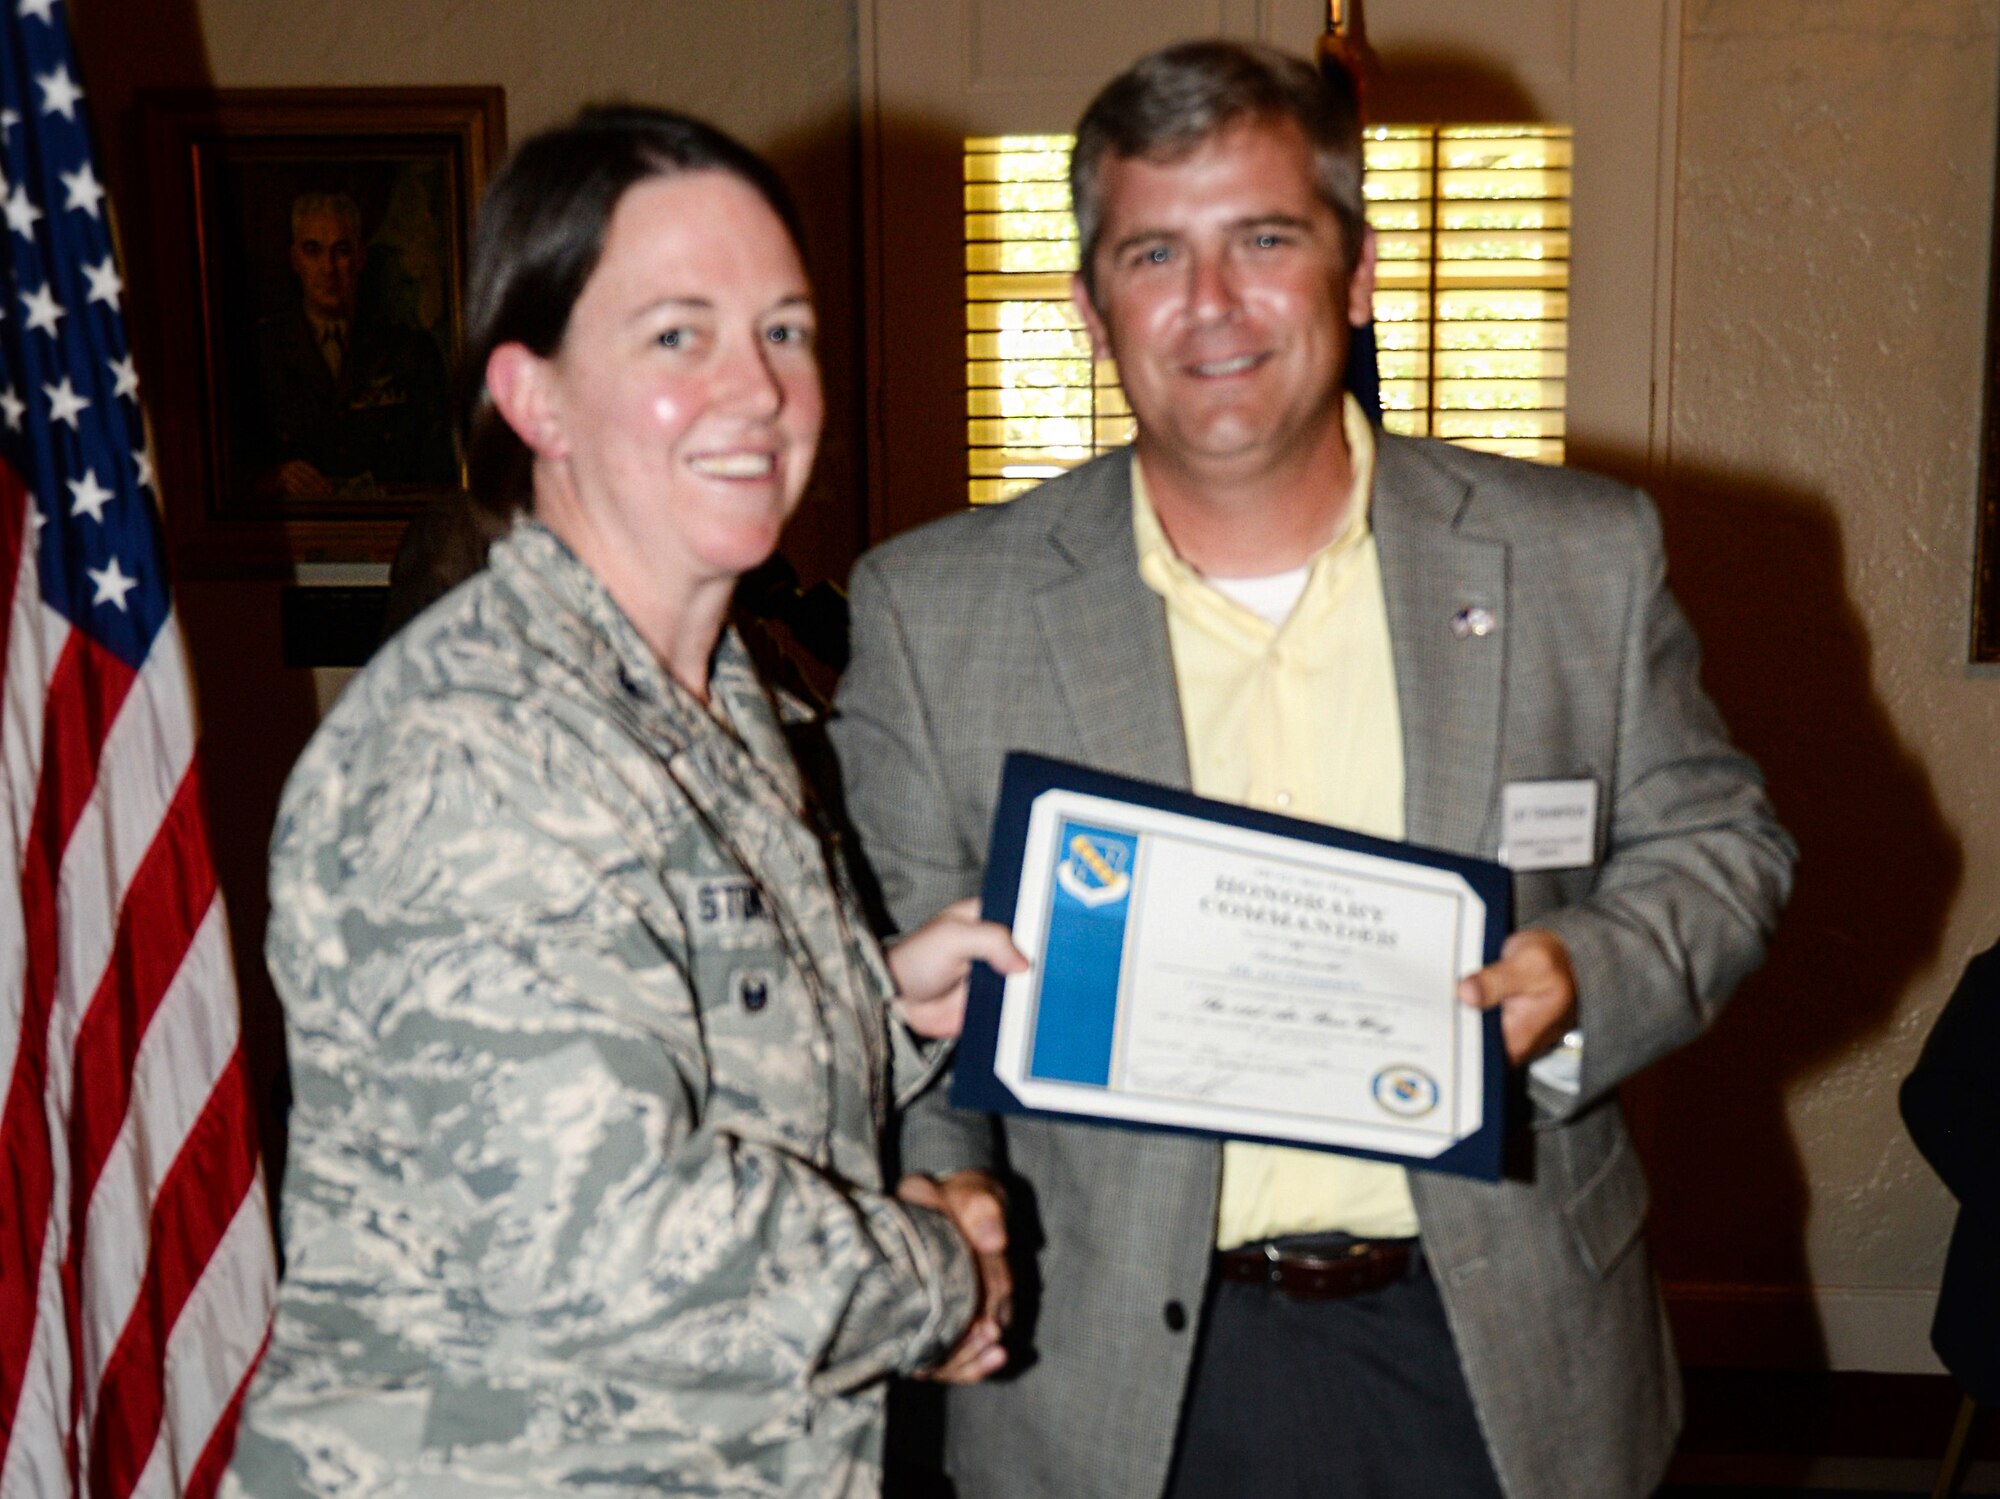 Colonel Melissa Stone, vice commander of the 42nd Air Base Wing, Maxwell Air Force Base, Alabama, congratulates her Honorary Commander, Jay Thompson, chairman of the Autauga, Alabama, County Commission, during the Honorary Commander Induction Ceremony at the Maxwell Club, June 19, 2018. (Air Force photo by Tech. Sgt. Patrick Brown)